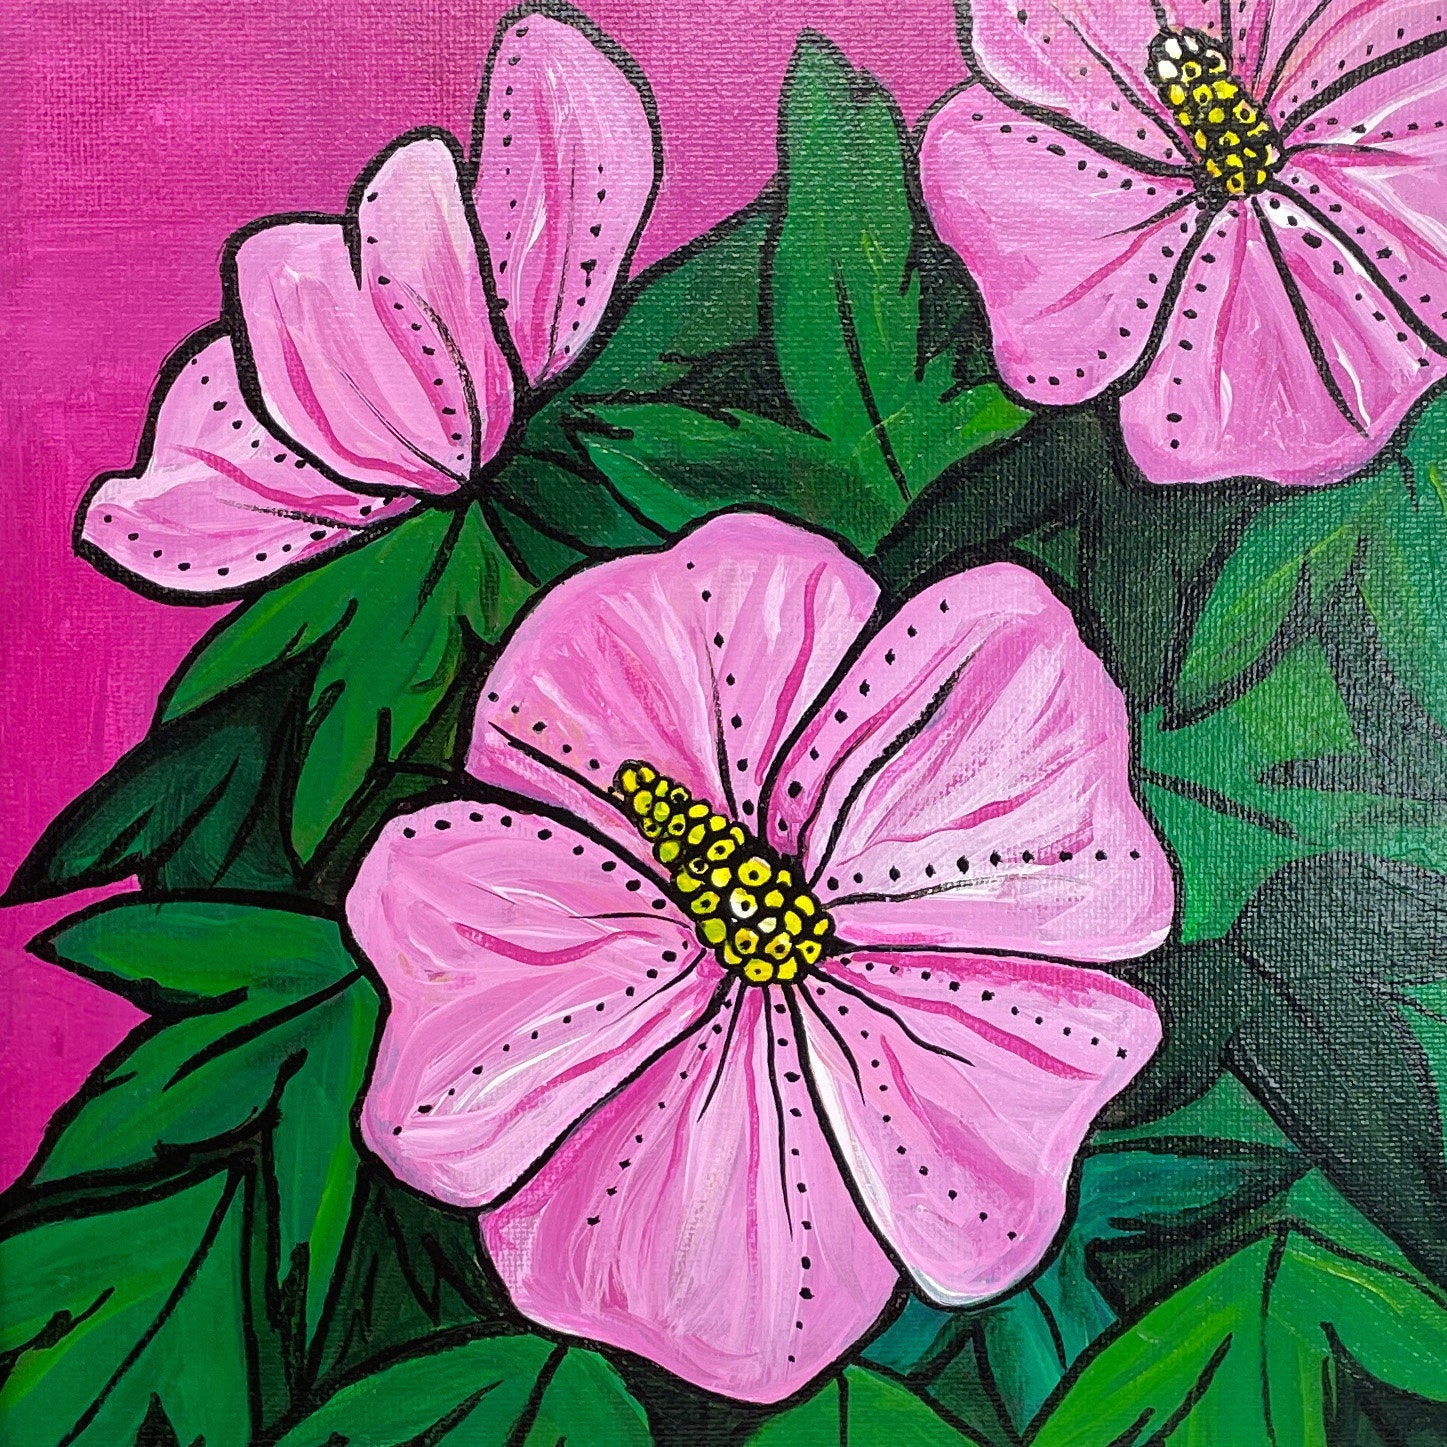 Pink Hibiscus Painting - Bold Bright Colors - Pink Green Original Floral Painting - Tropical 11x14 Framed Acrylic Painting - Claudine Intner